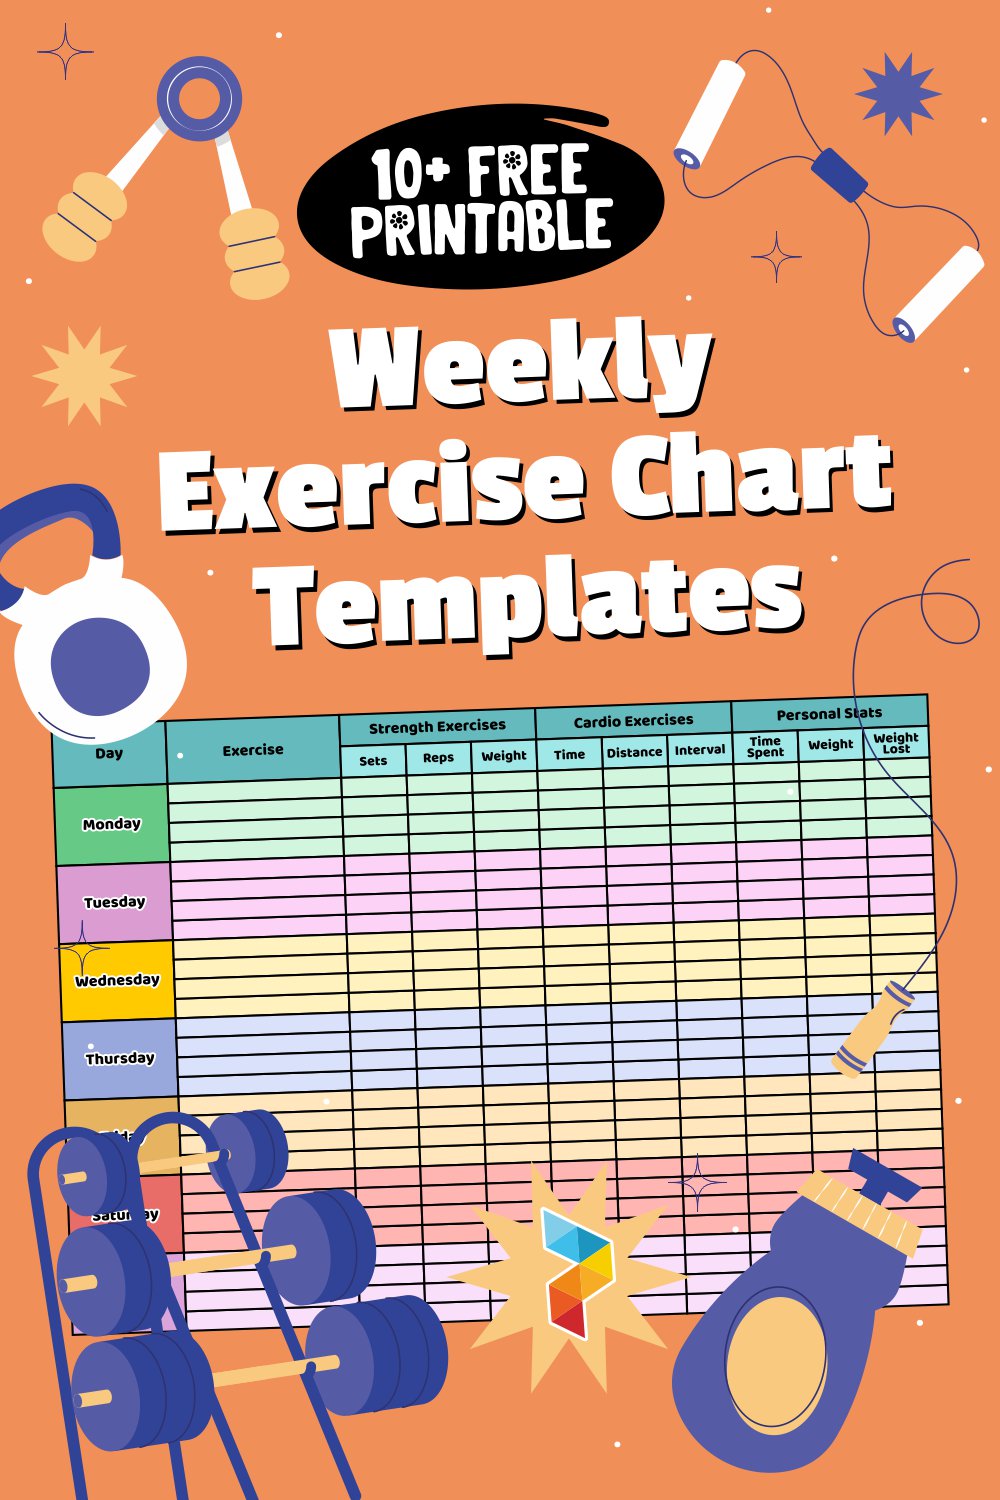 Weekly Exercise Chart Templates